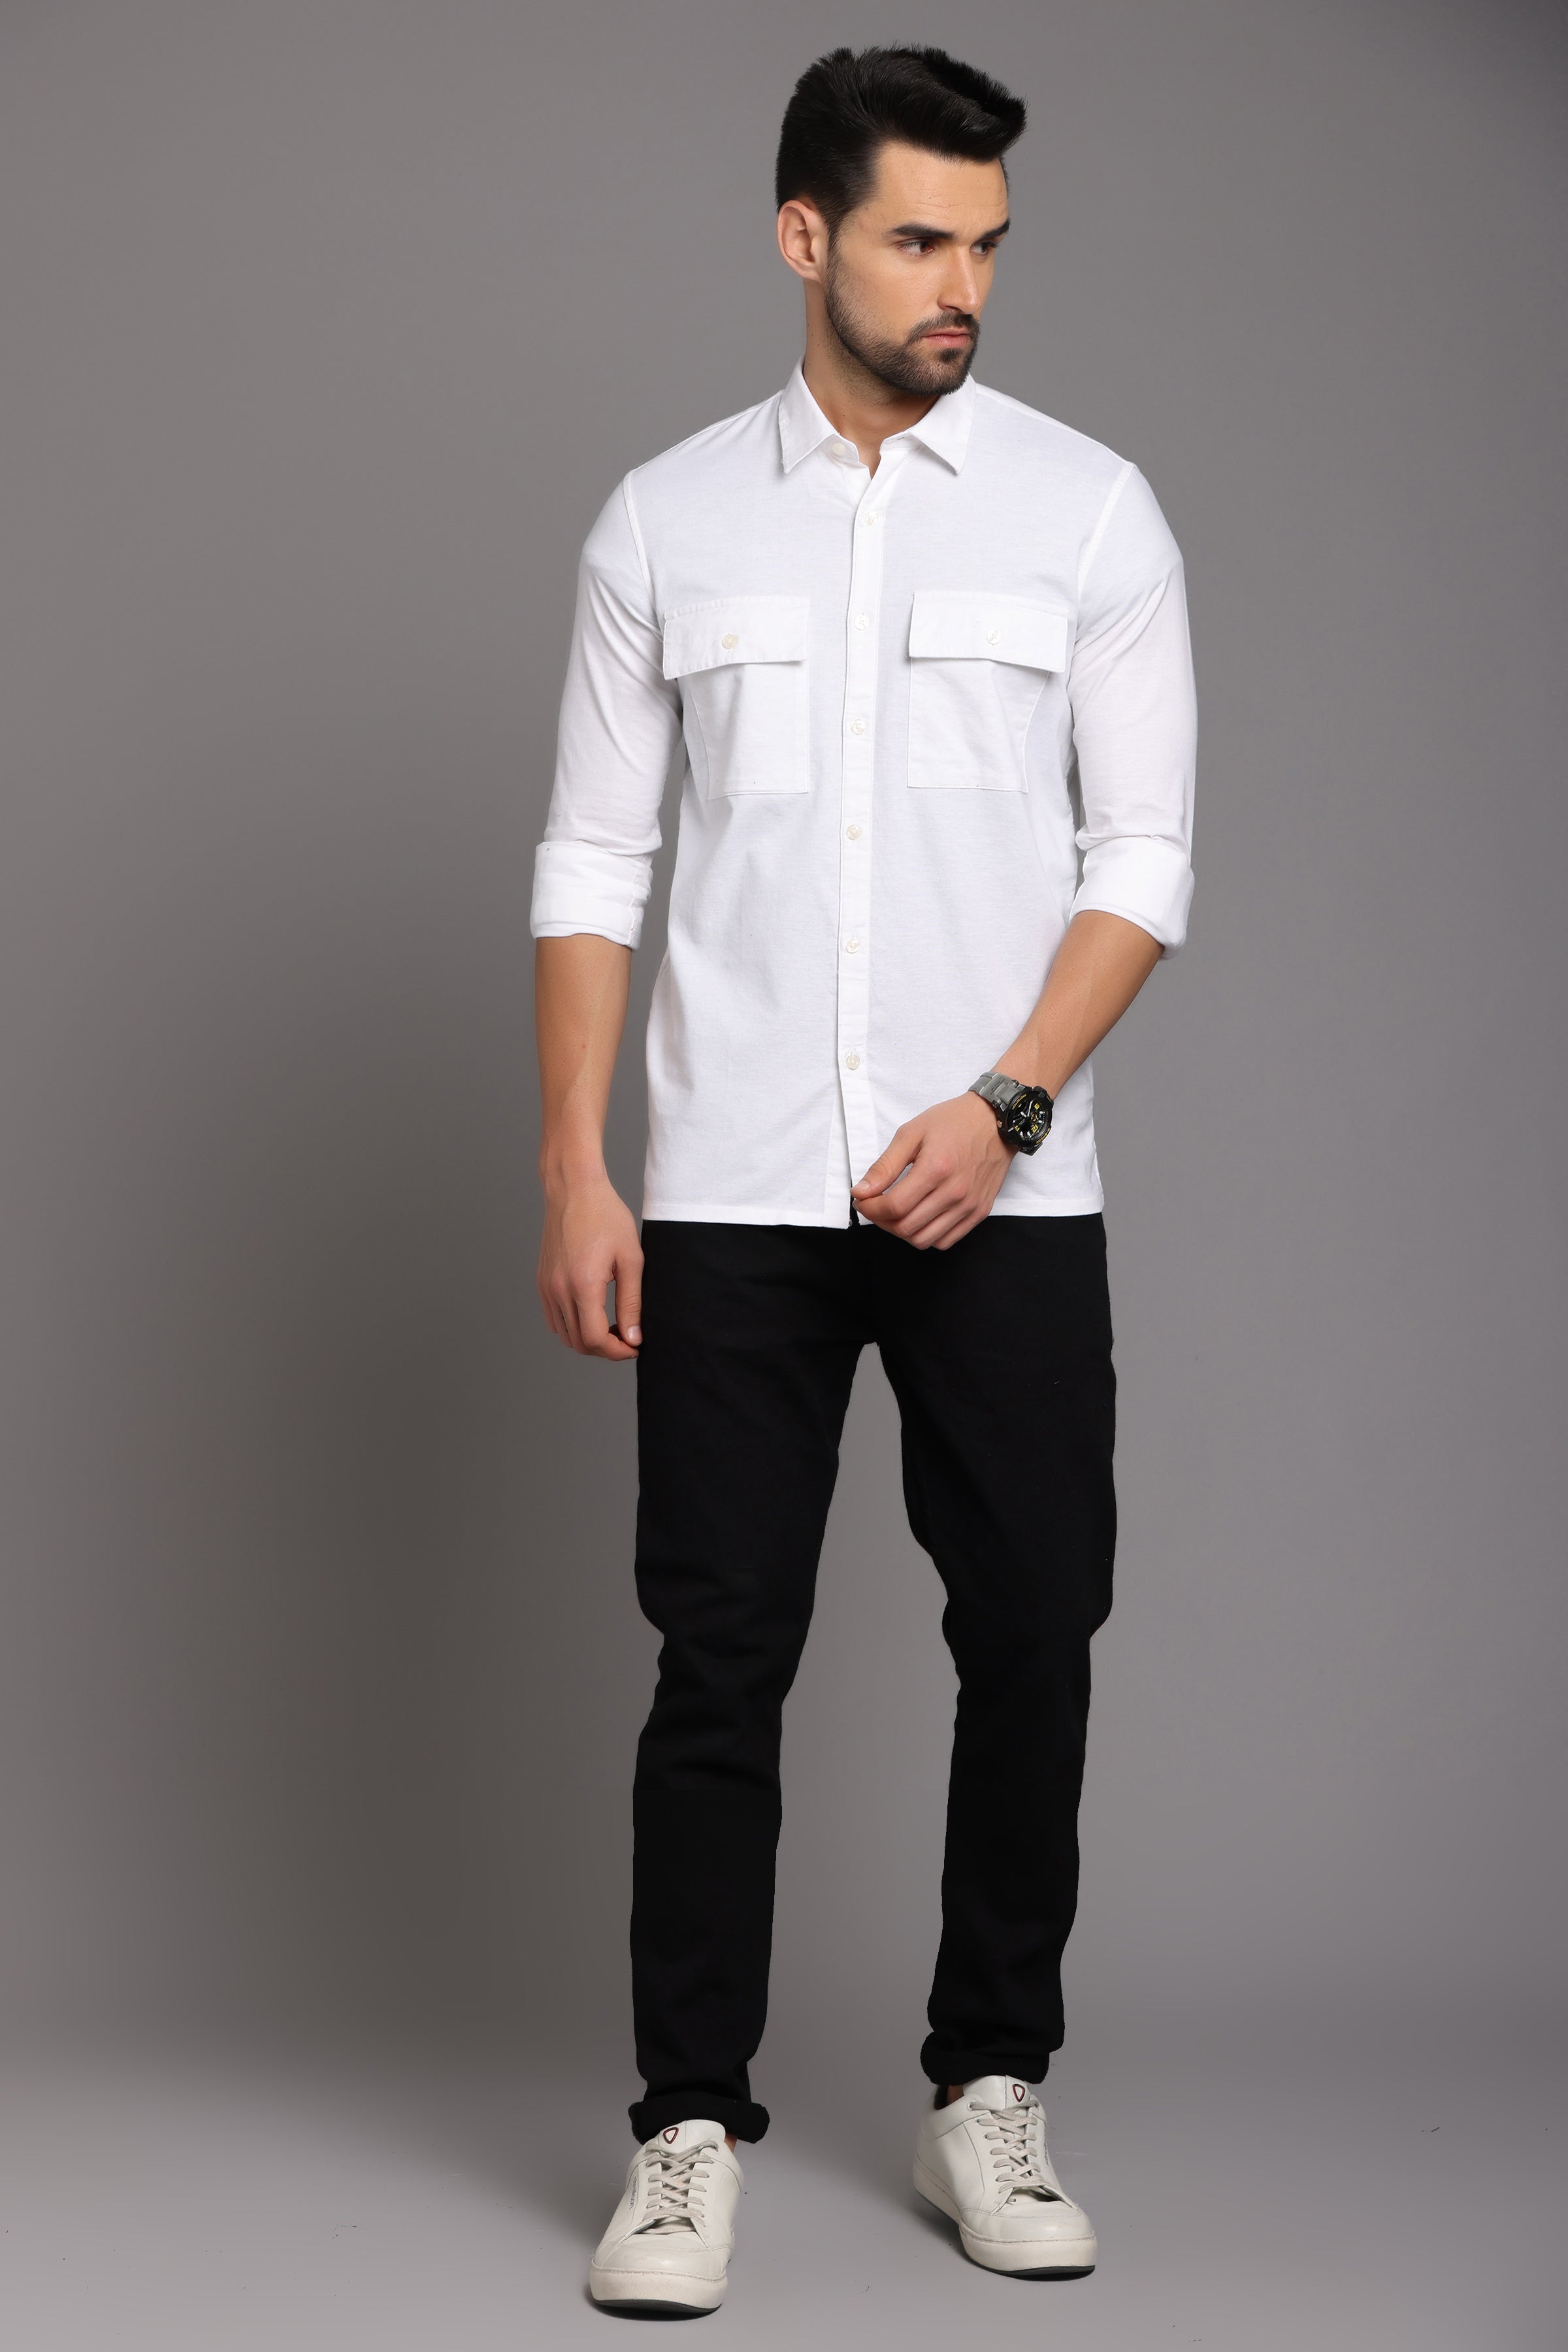 White Full Sleeve Shirt with Double Pocket Shirts Project 30 